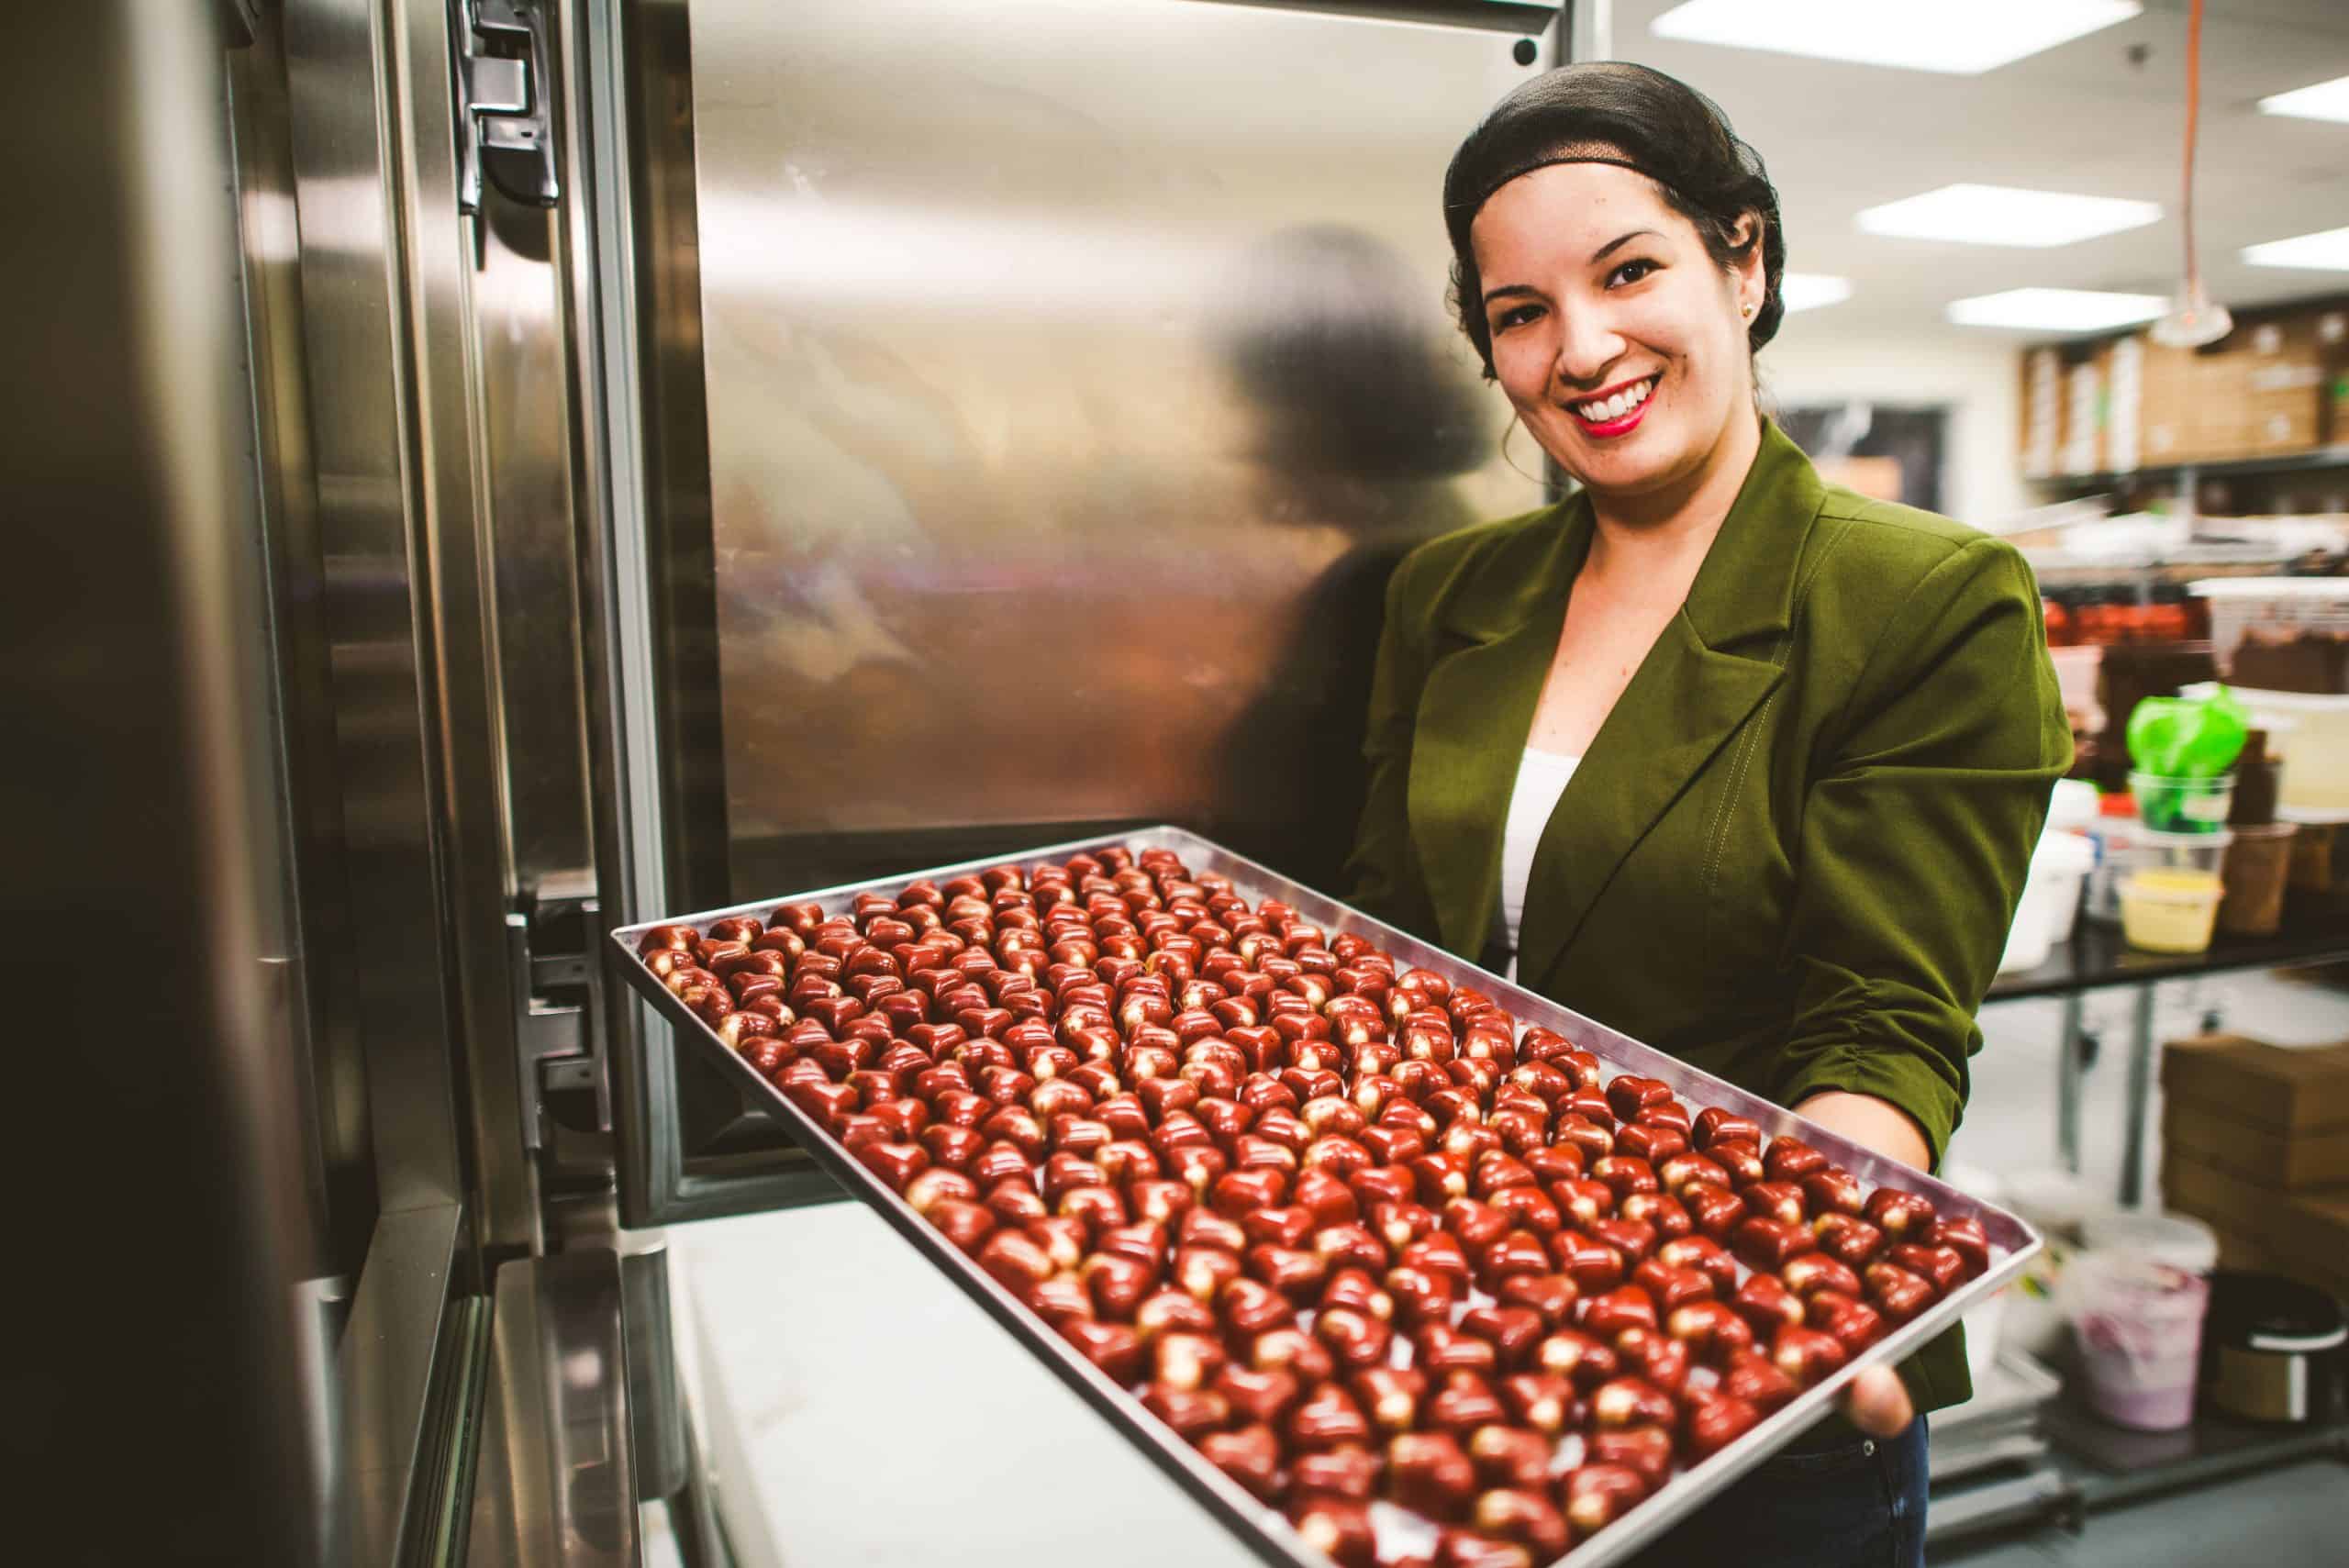 Smiling entrepreneur holding a tray of chocolates after securing a loan for small business.